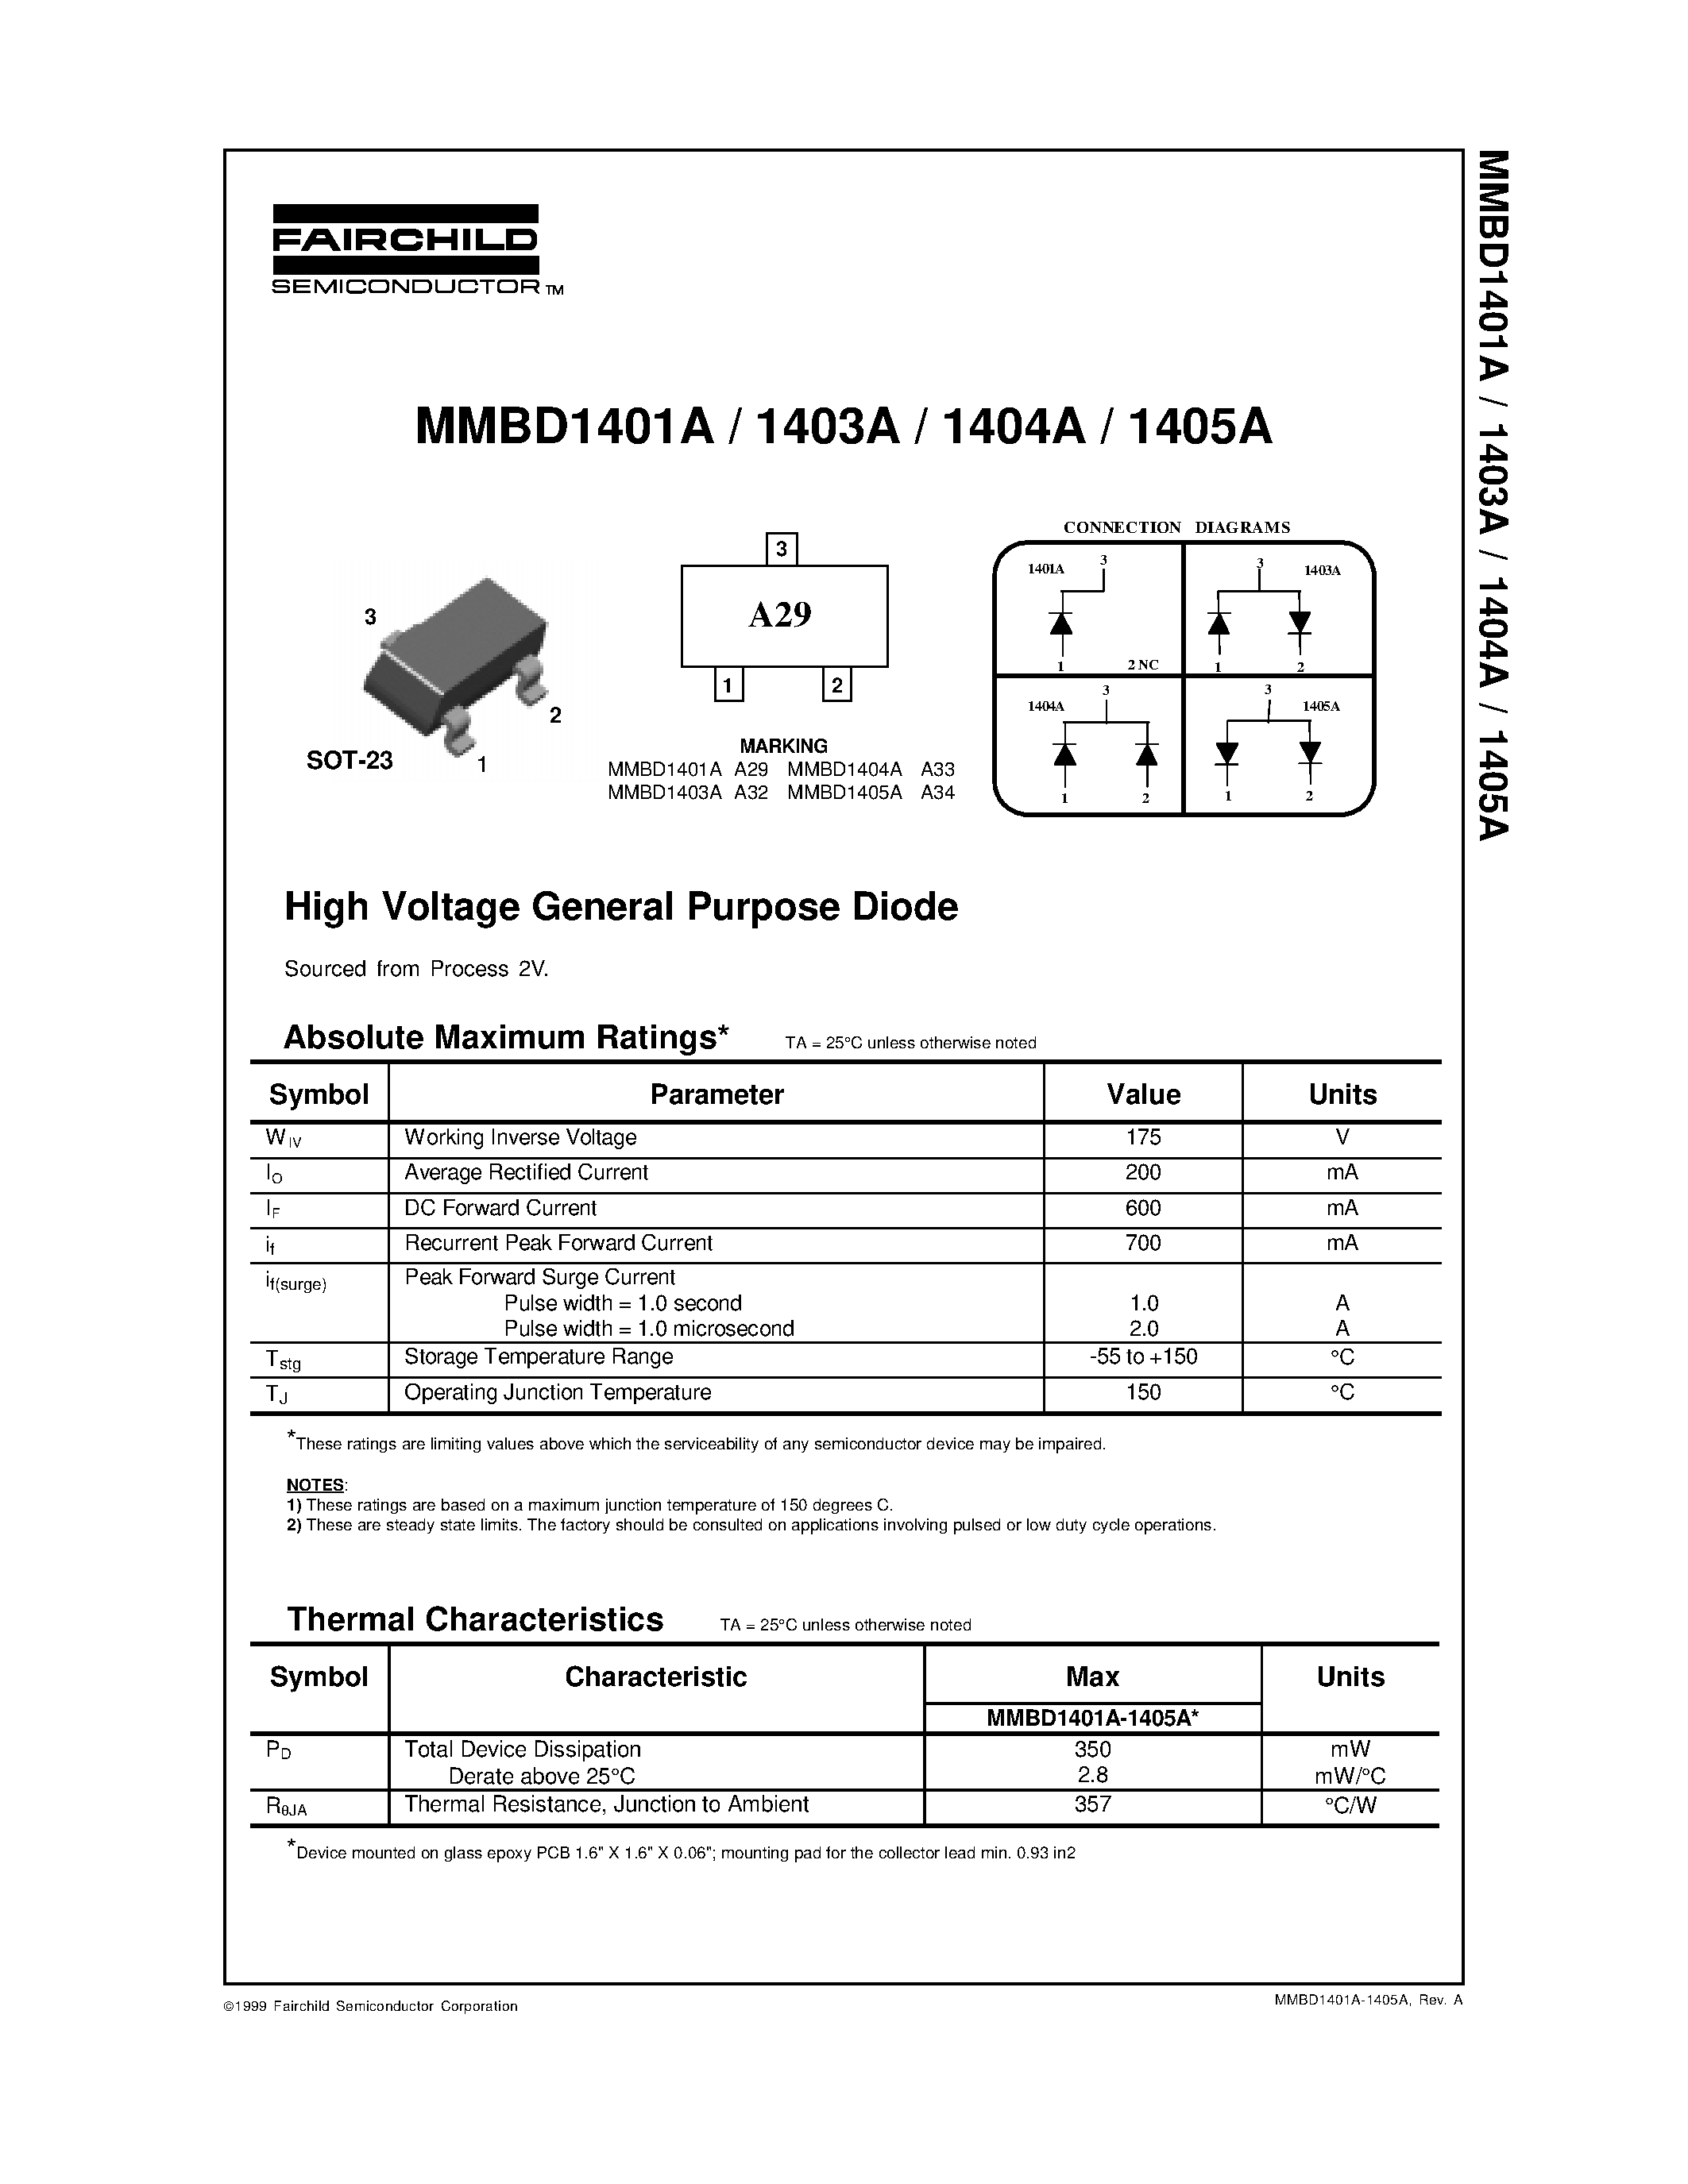 Datasheet MMBD1403A - High Voltage General Purpose Diode page 1